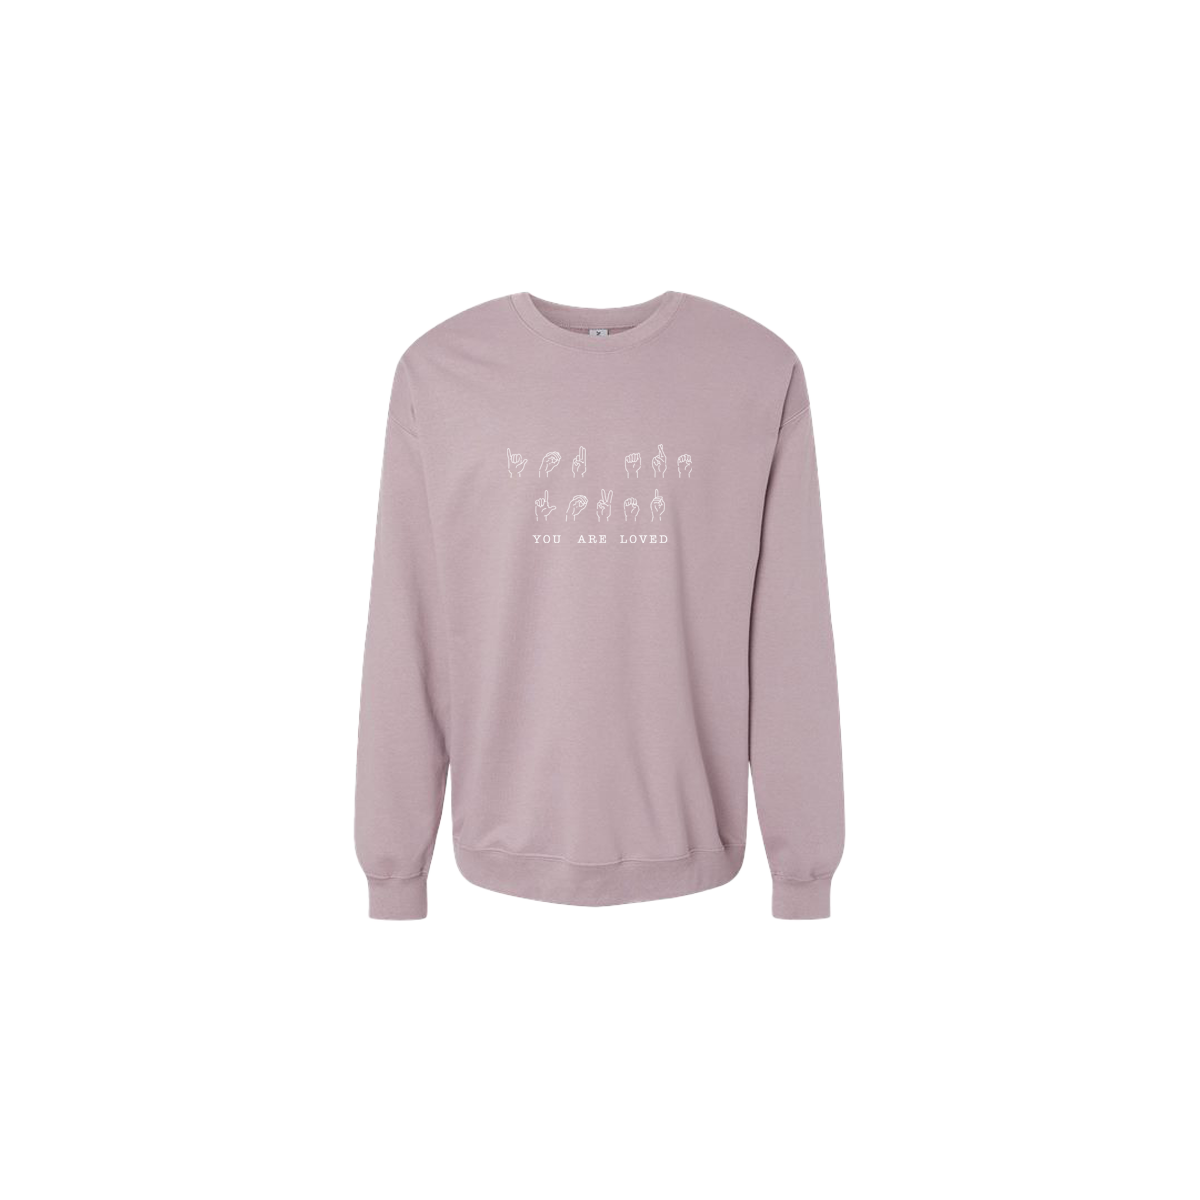 You Are Loved Sign Language Embroidered Mauve Crewneck - Mental Health Awareness Clothing